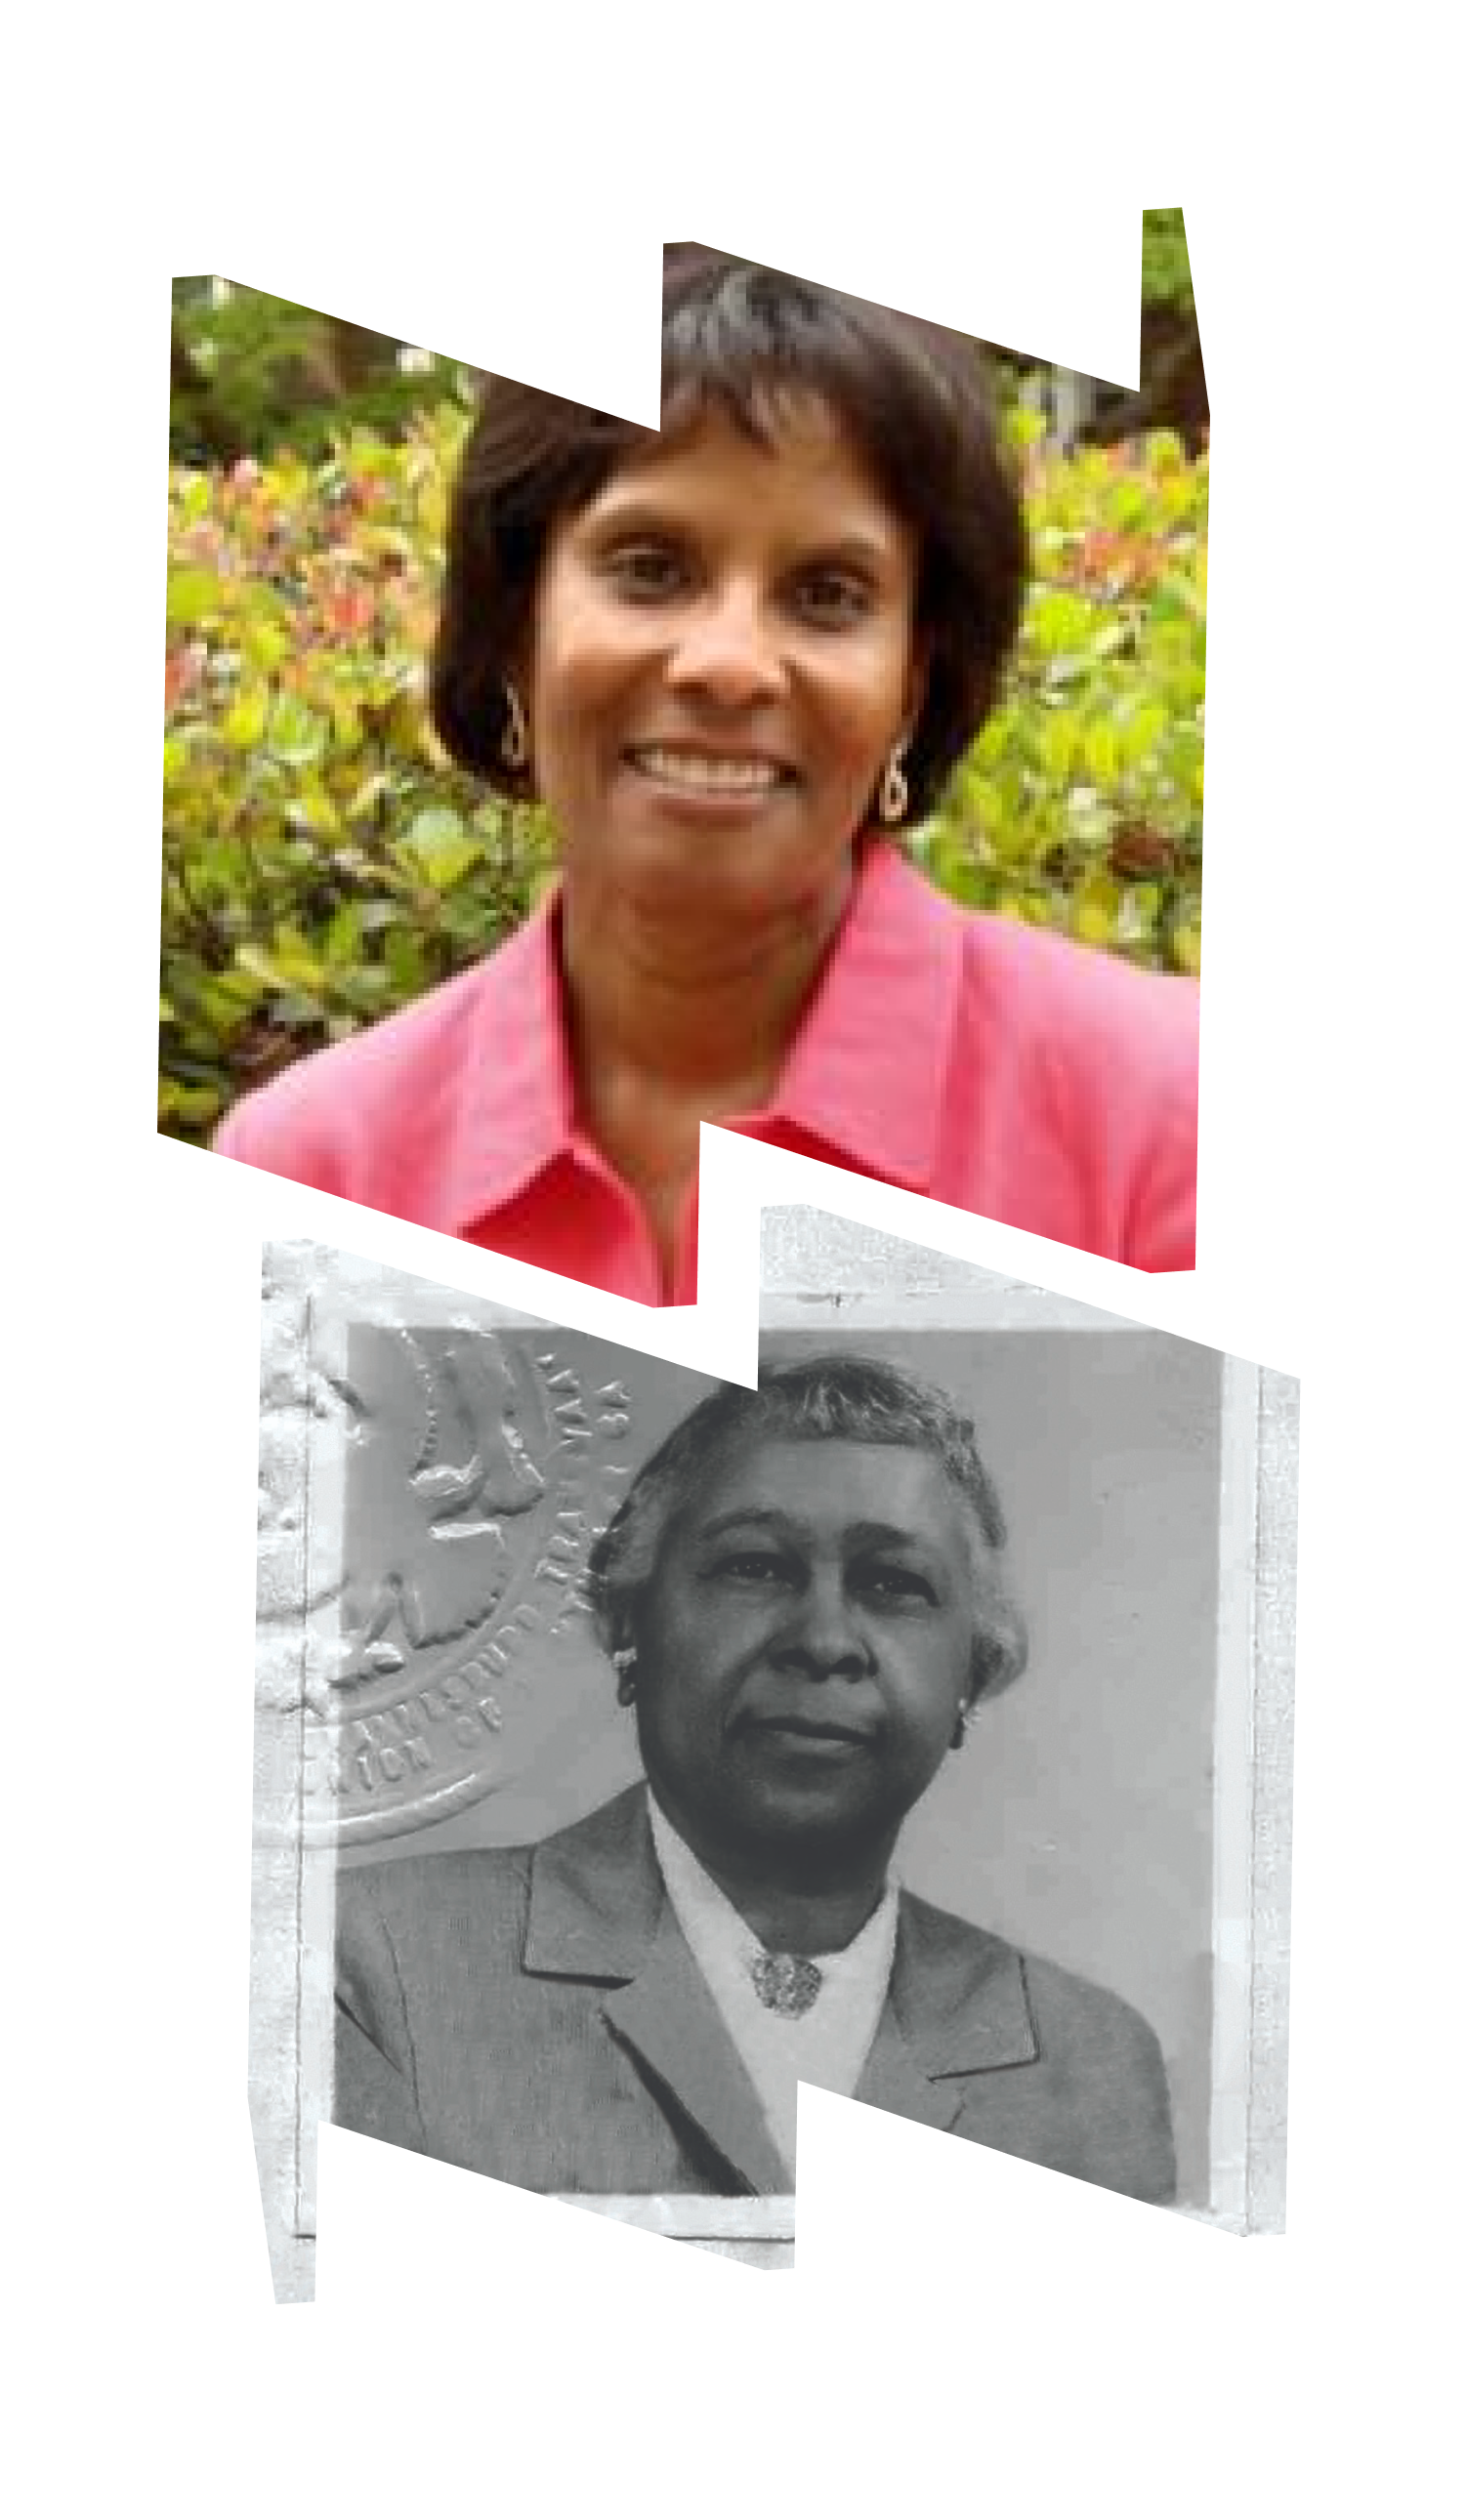 Top "W" frame headshot of author Wanda A. Hendricks; bottom "M" frame with black and white portrait of Madie Hall Xuma from book cover.